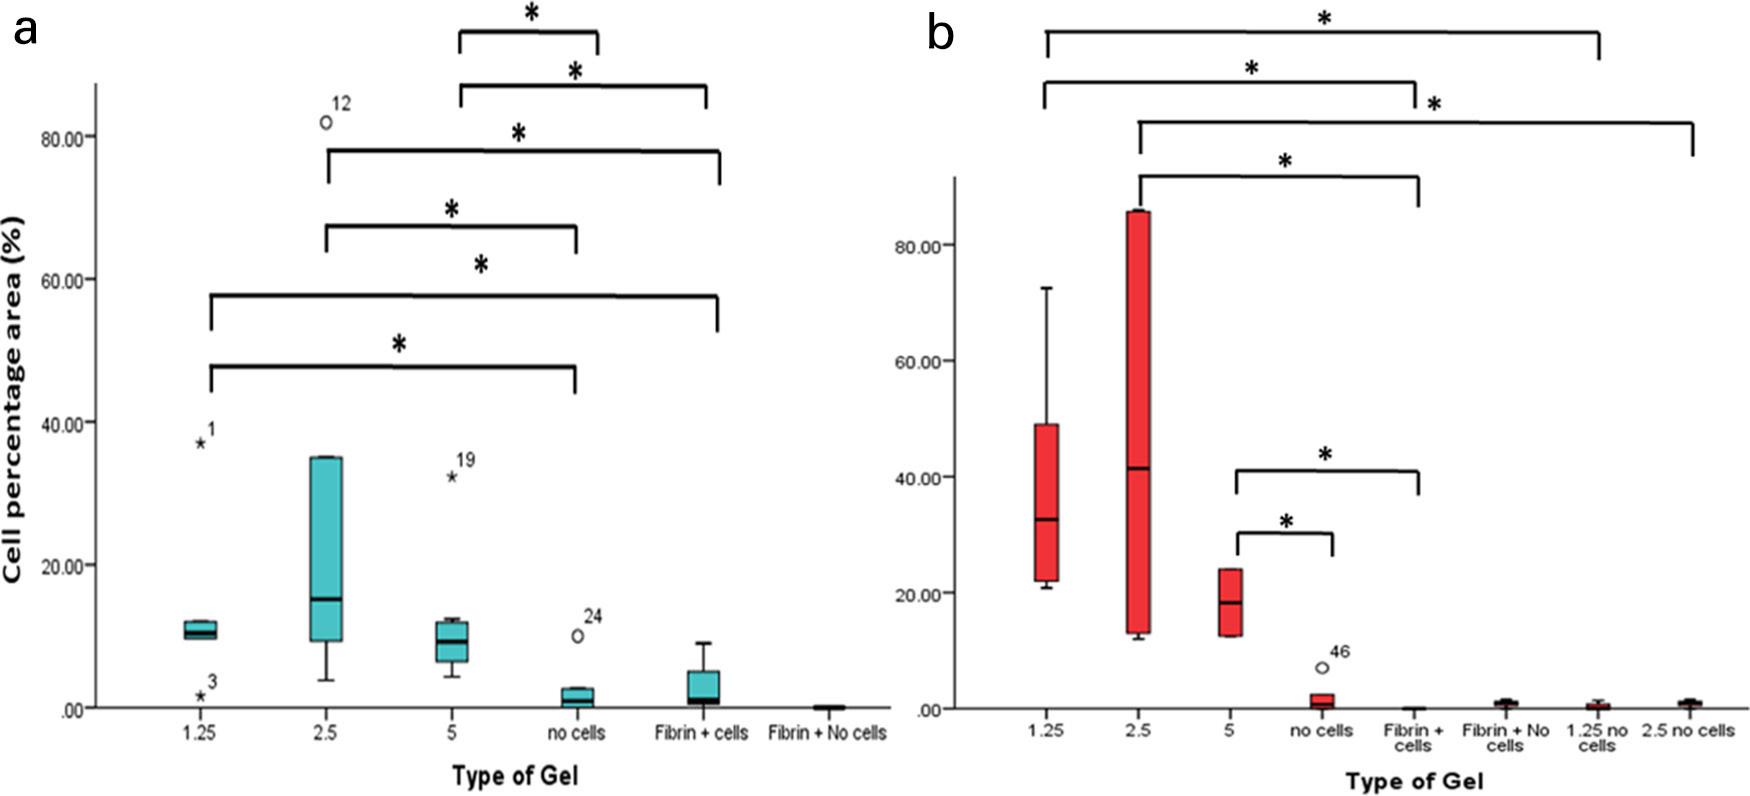 Fig. 6 
            Percentage cell area for the different platelet rich plasma (PRP) concentration gels and fibrin glue, with and without cells at day 7 (A) and day 14 (B). When implemented with bone marrow aspirate, the ABG had a statistically significantly higher cell area compared to fibrin glue after days 7 and 14. *p < 0.05.
          